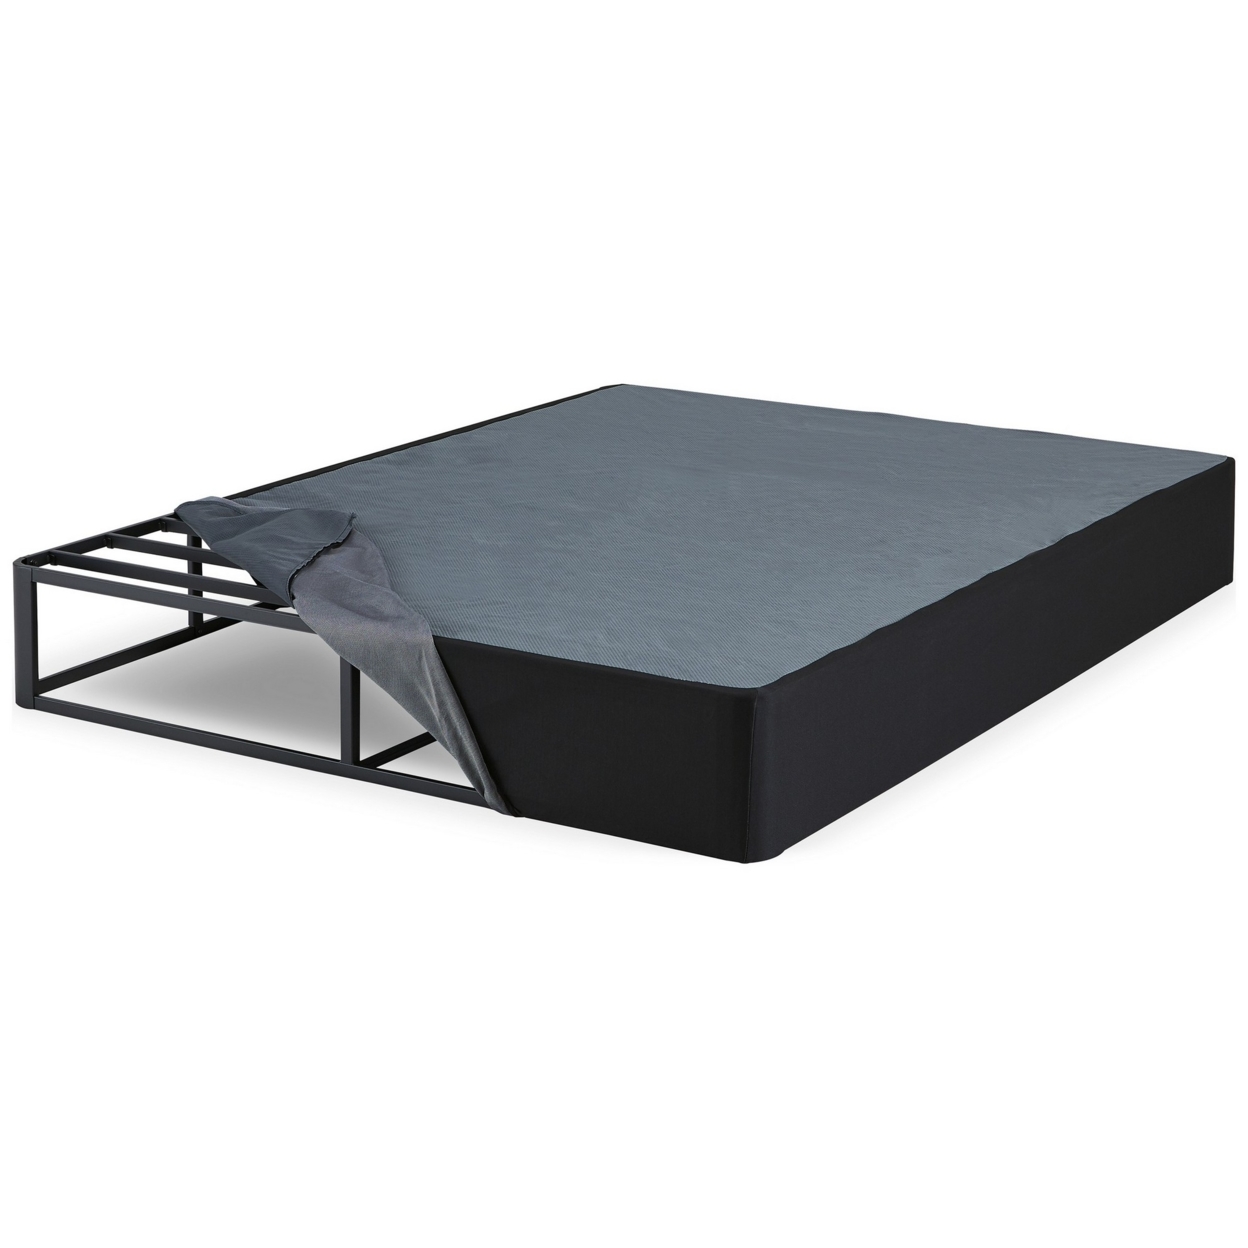 Metal Queen Size Bed Foundation, Removable Gray Fabric Cover, Foldable